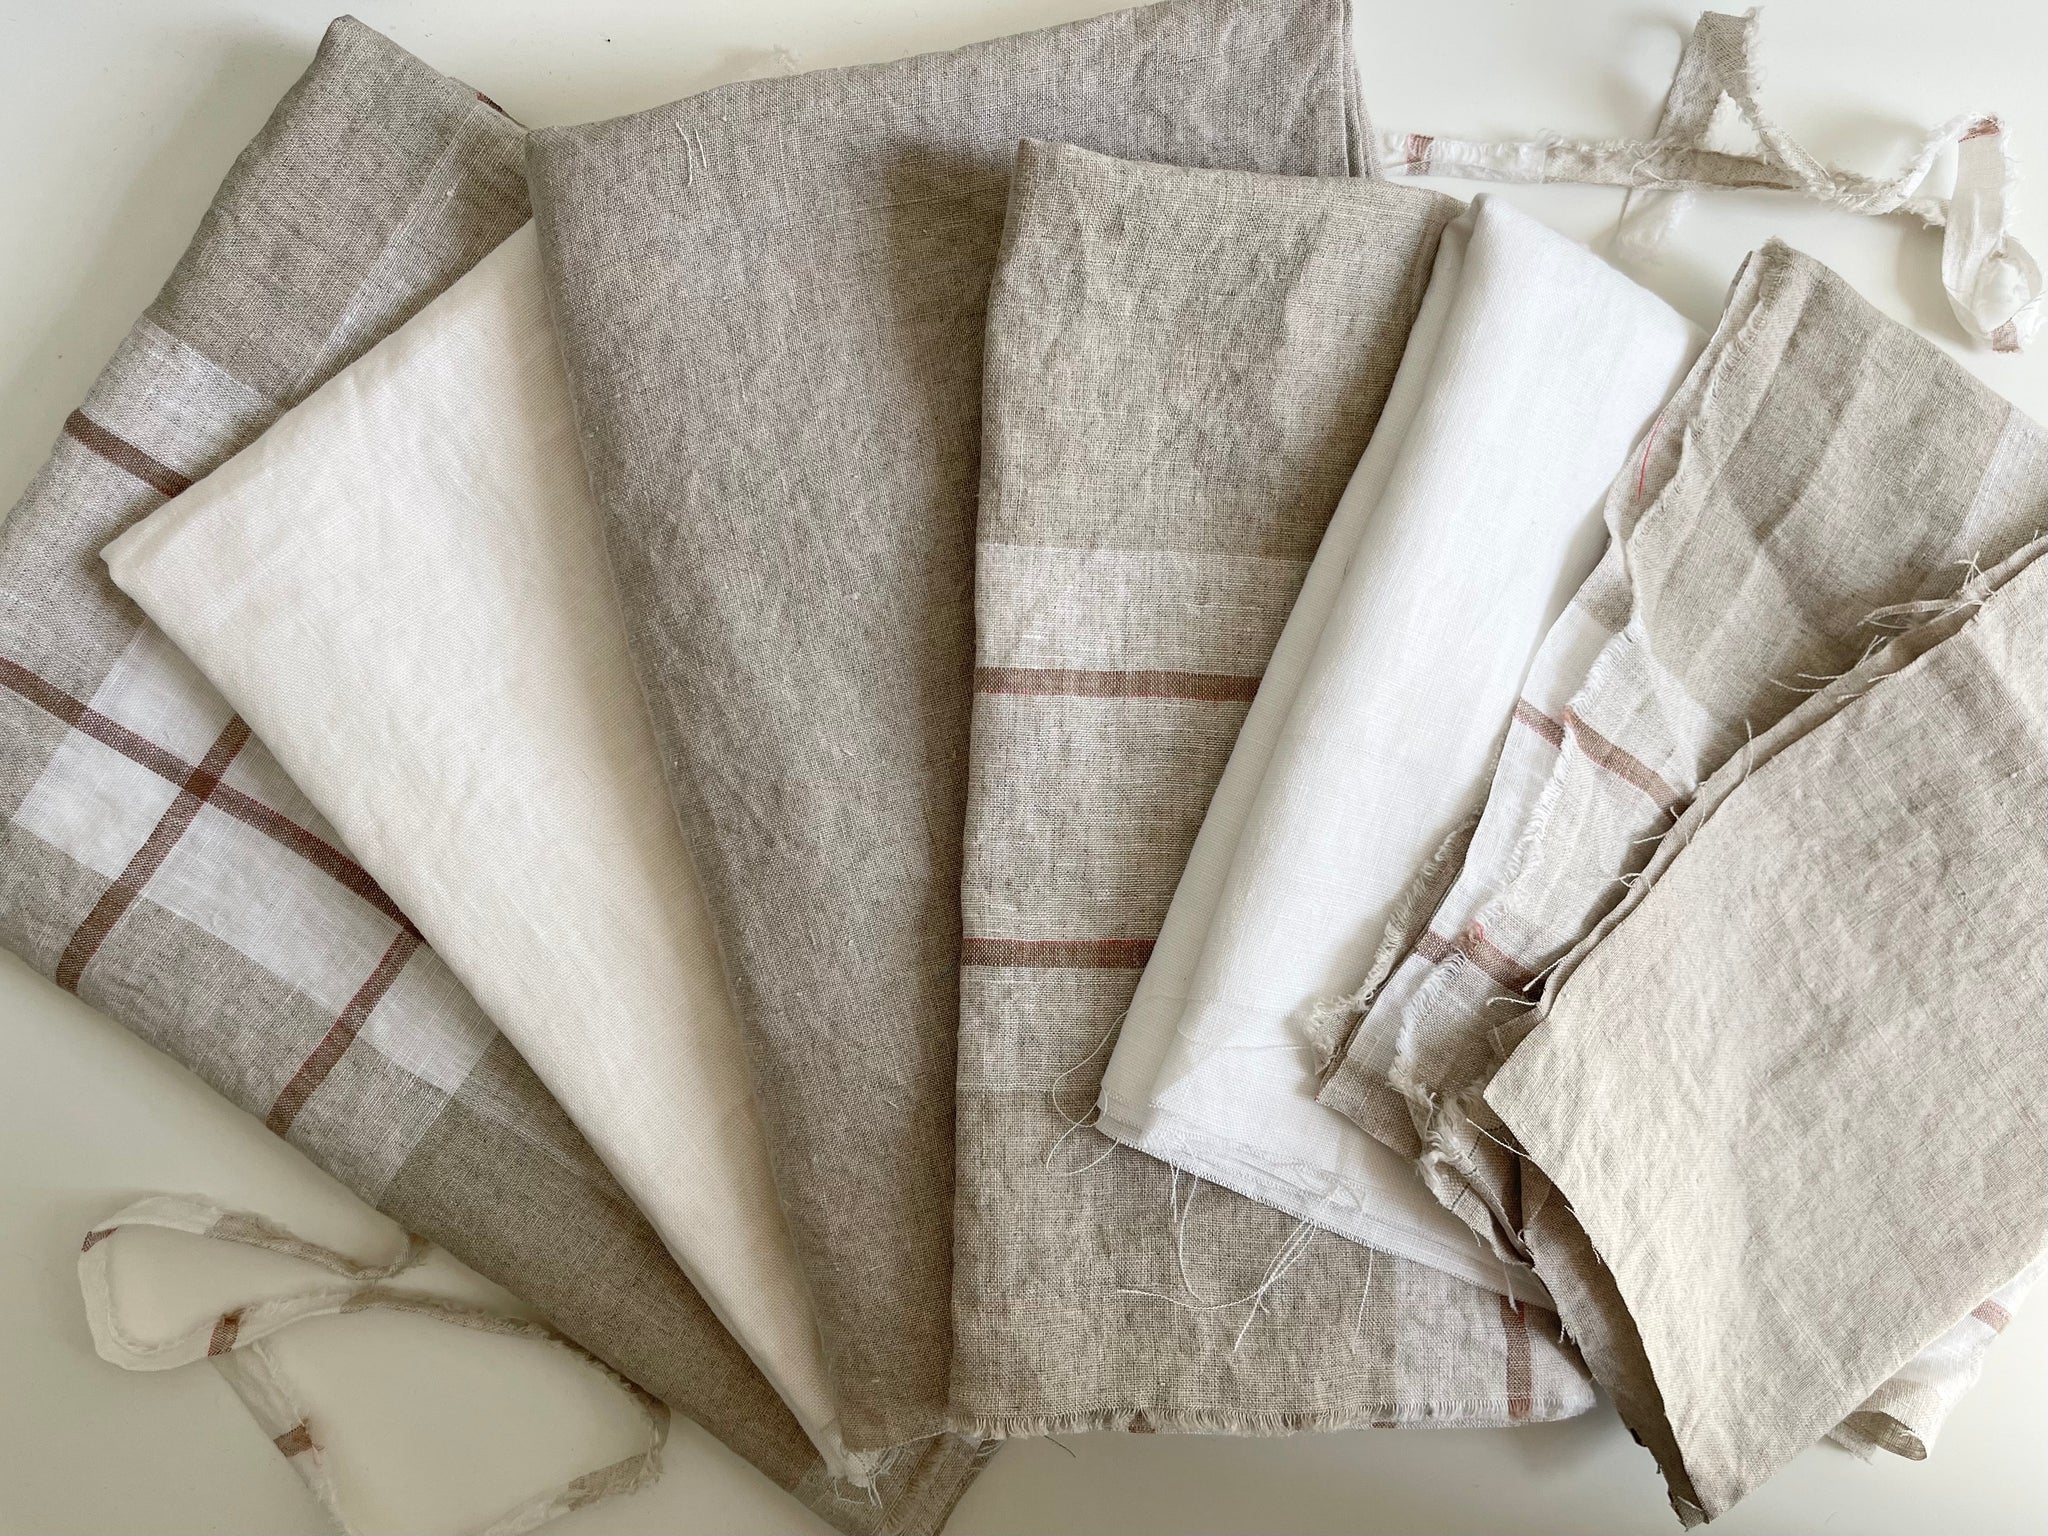 Linen Fabric Remnants - White, Natural and White Natural Plaid